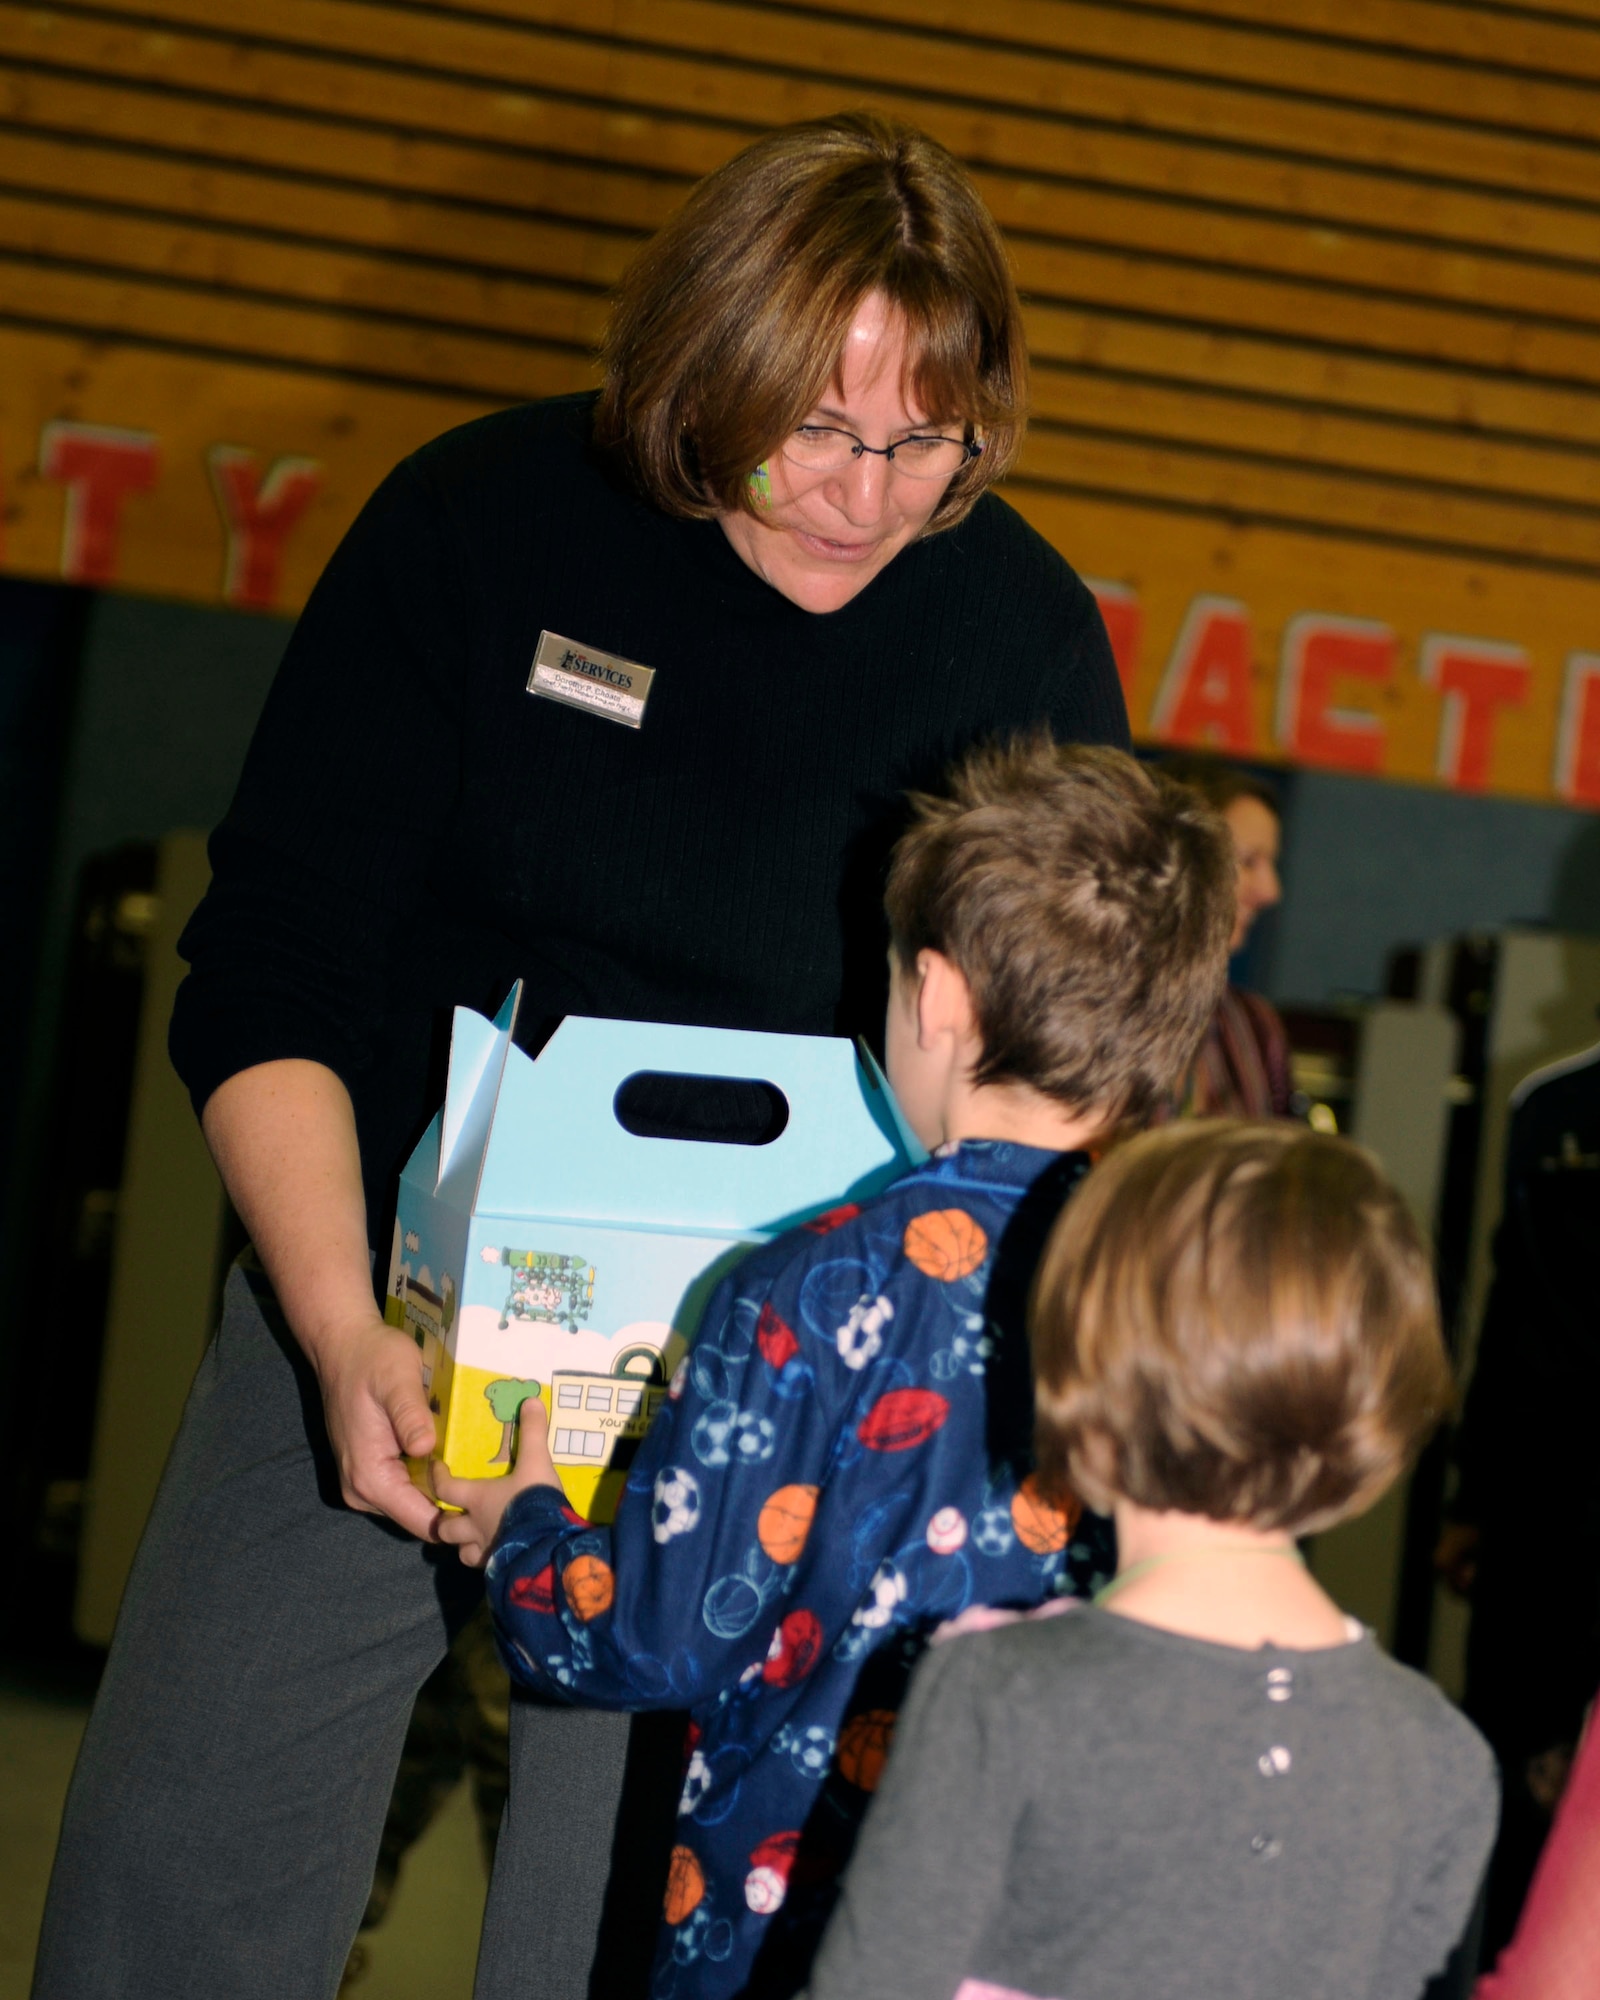 Dorothy Choate, 86th Services Squadron, family member program flight chief, hands out Cuzzie Cares Deployment Kits at Ramstein Elementary School, Ramstein Air Base, Germany, Dec. 17, 2009. Cuzzie, designed by Mr. Trevor Romain, is an inventive bear that creates flying machines with the help of his ground crew and is the centerpiece of a new kit designed to comfort school-age children during deployments. (U.S. Air Force photo by Airman 1st Class Brea Miller)